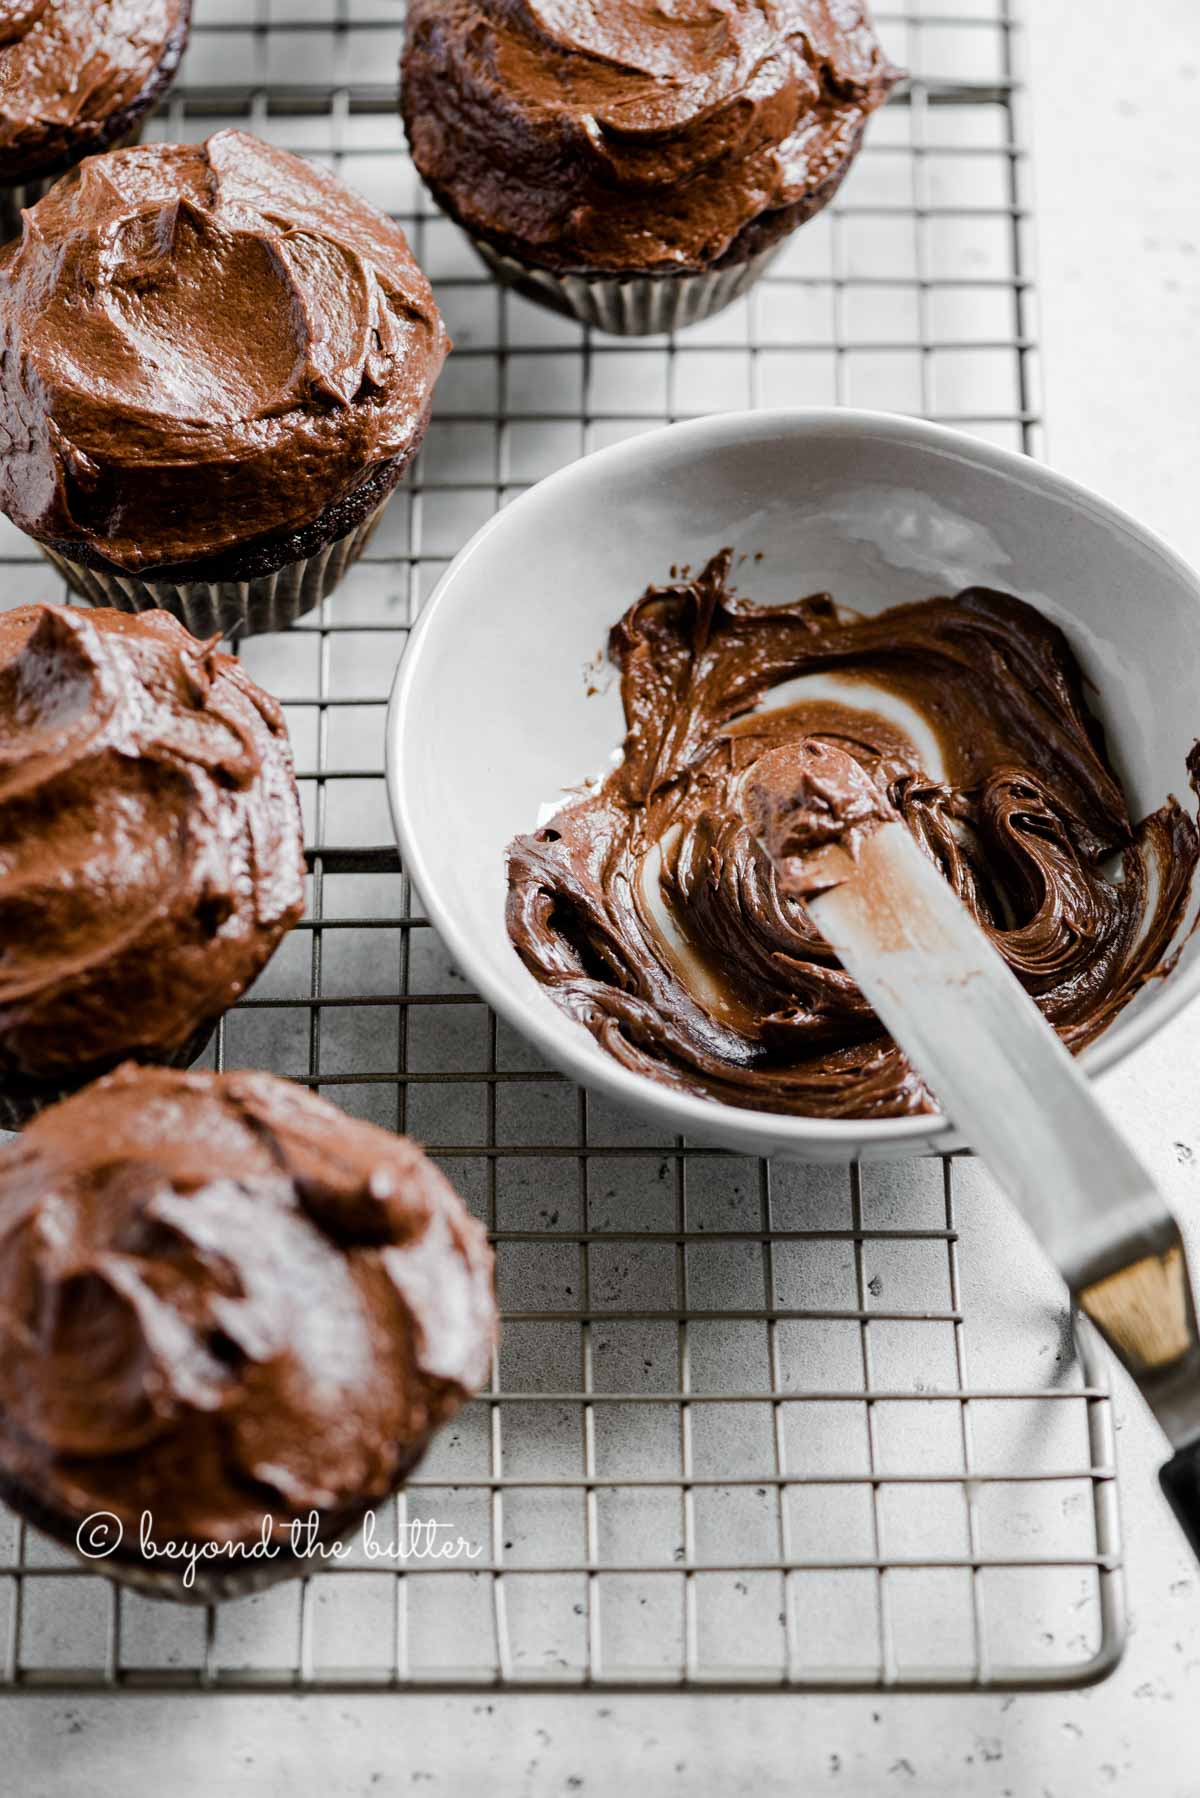 Angled image of chocolate cupcakes on cooling rack with small bowl of chocolate frosting and offset spatula | All Images © Beyond the Butter™